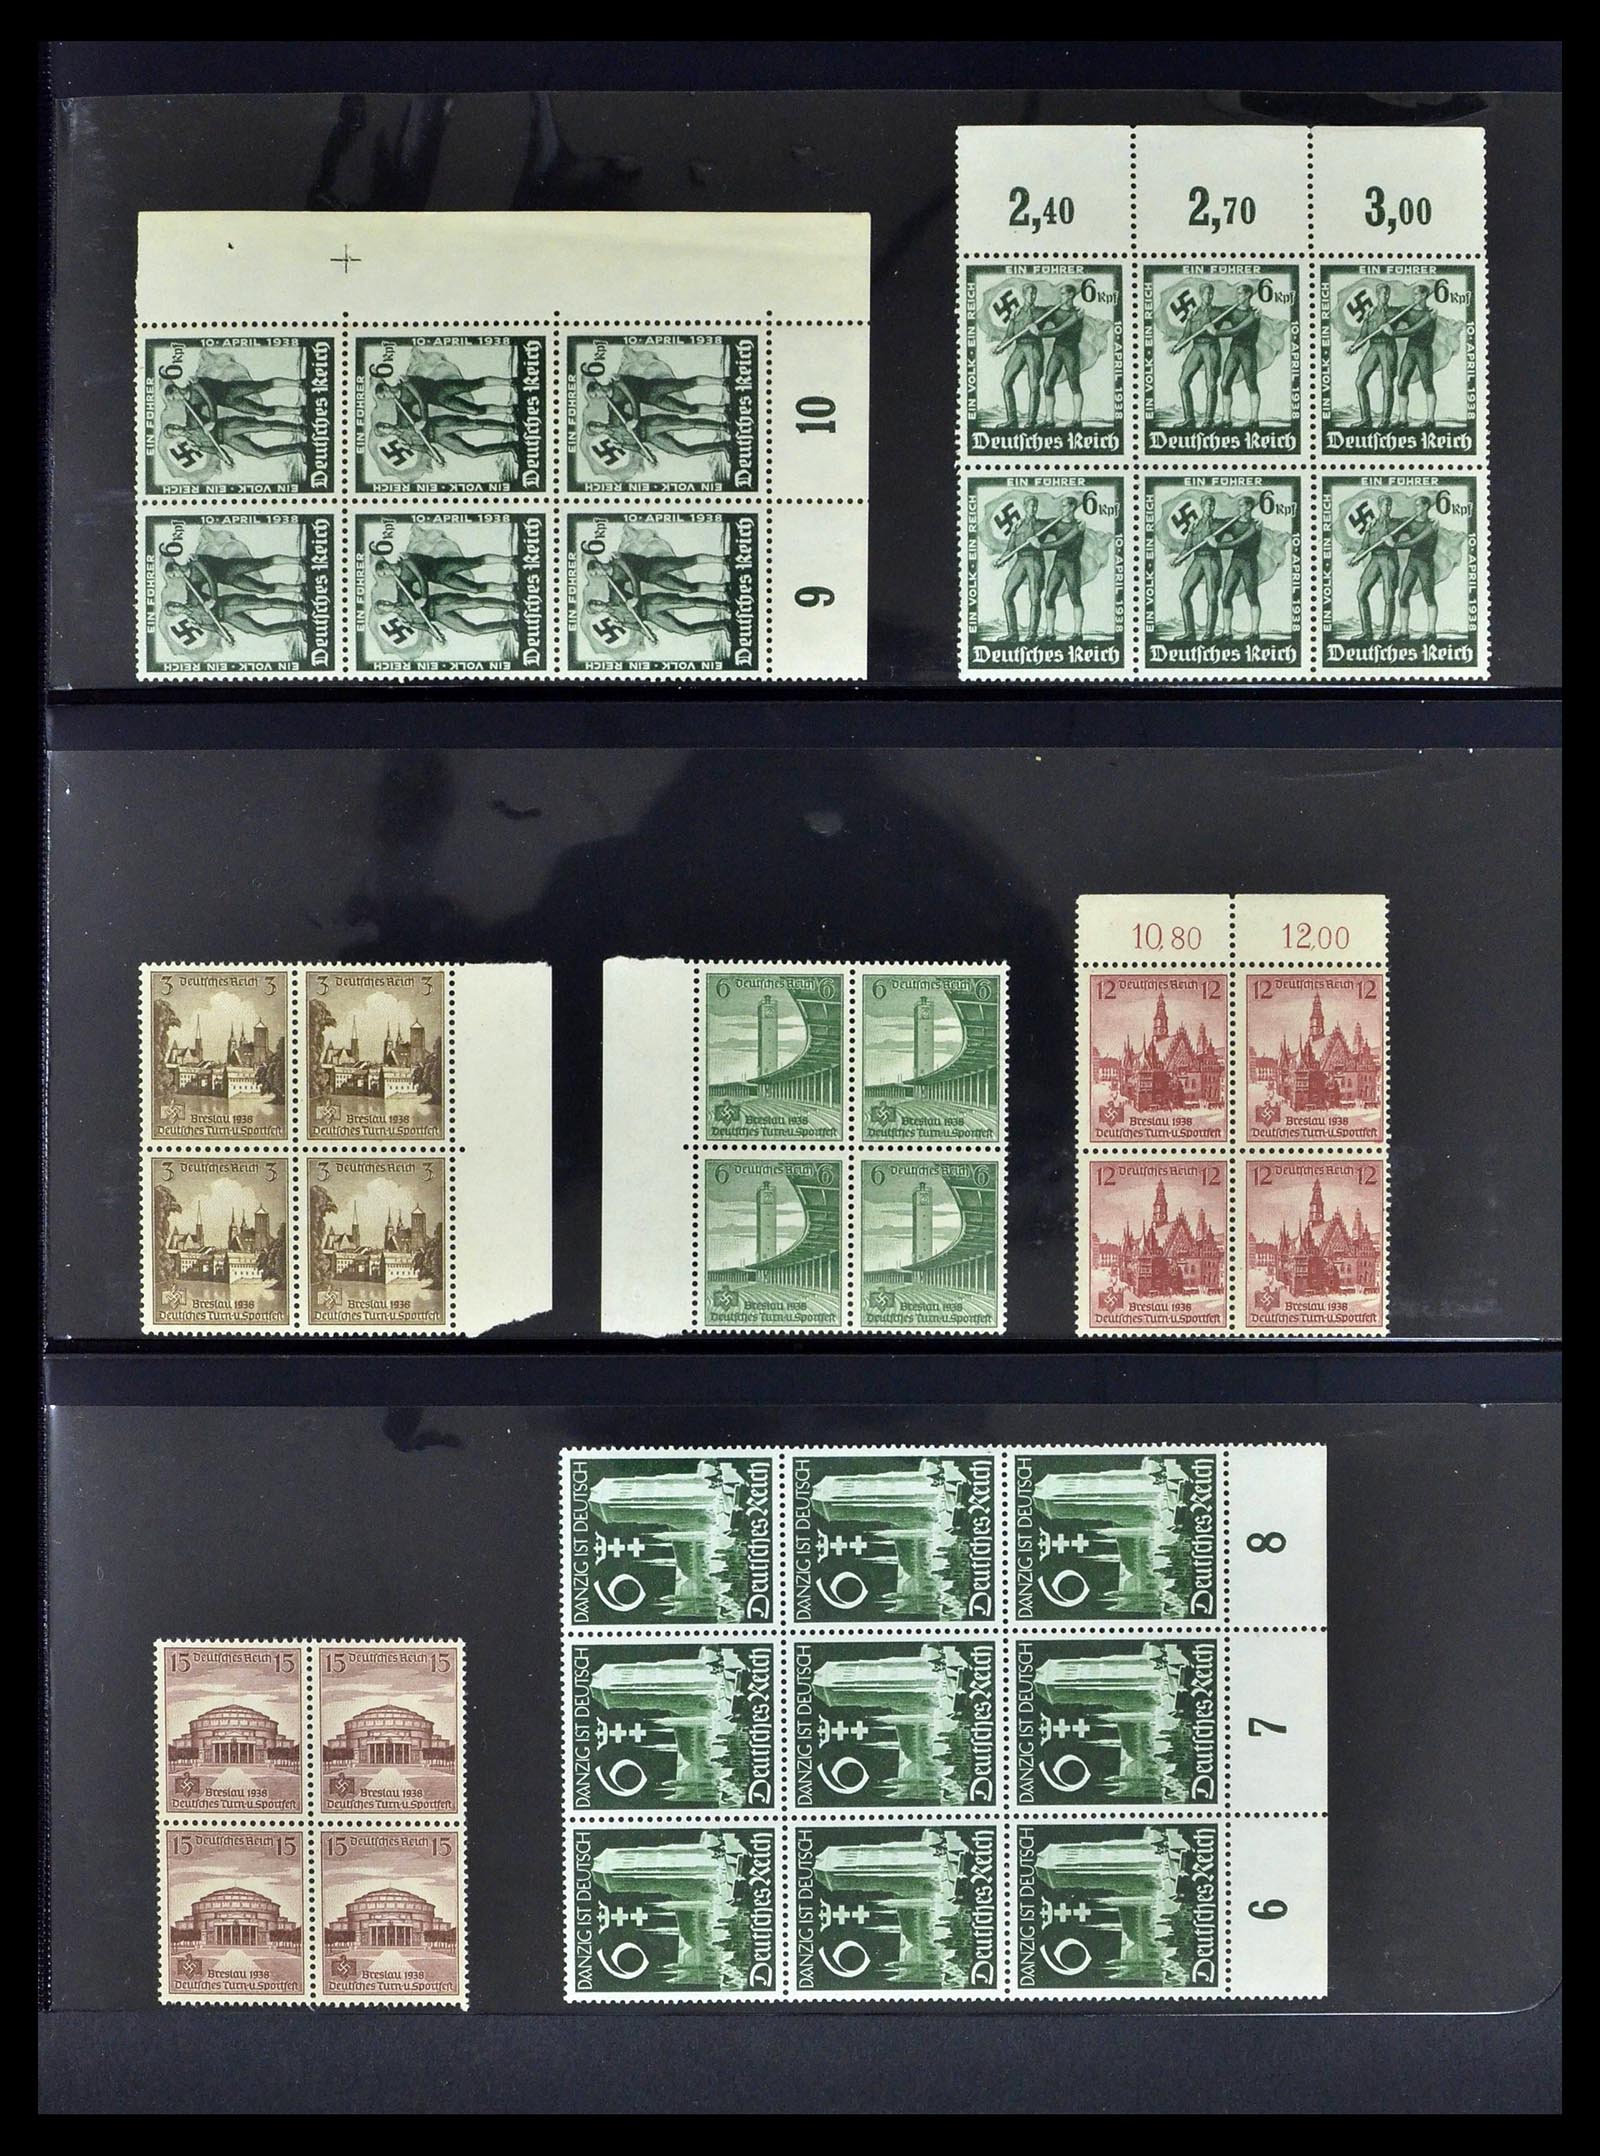 39255 0019 - Stamp collection 39255 German Reich MNH blocks of 4.